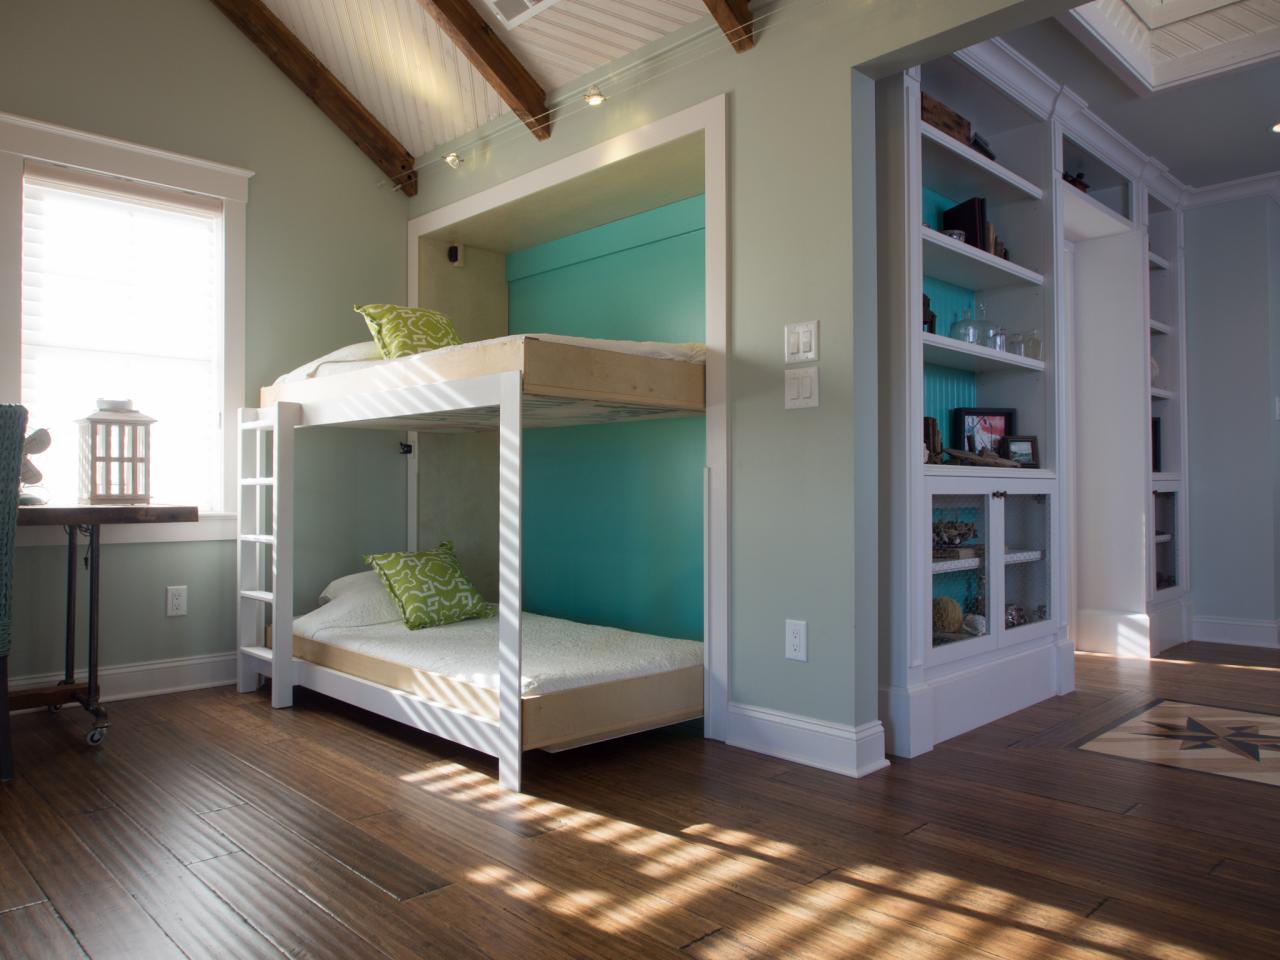 Build A Side Fold Murphy Bunk Bed, How To Attach Bunk Beds Together